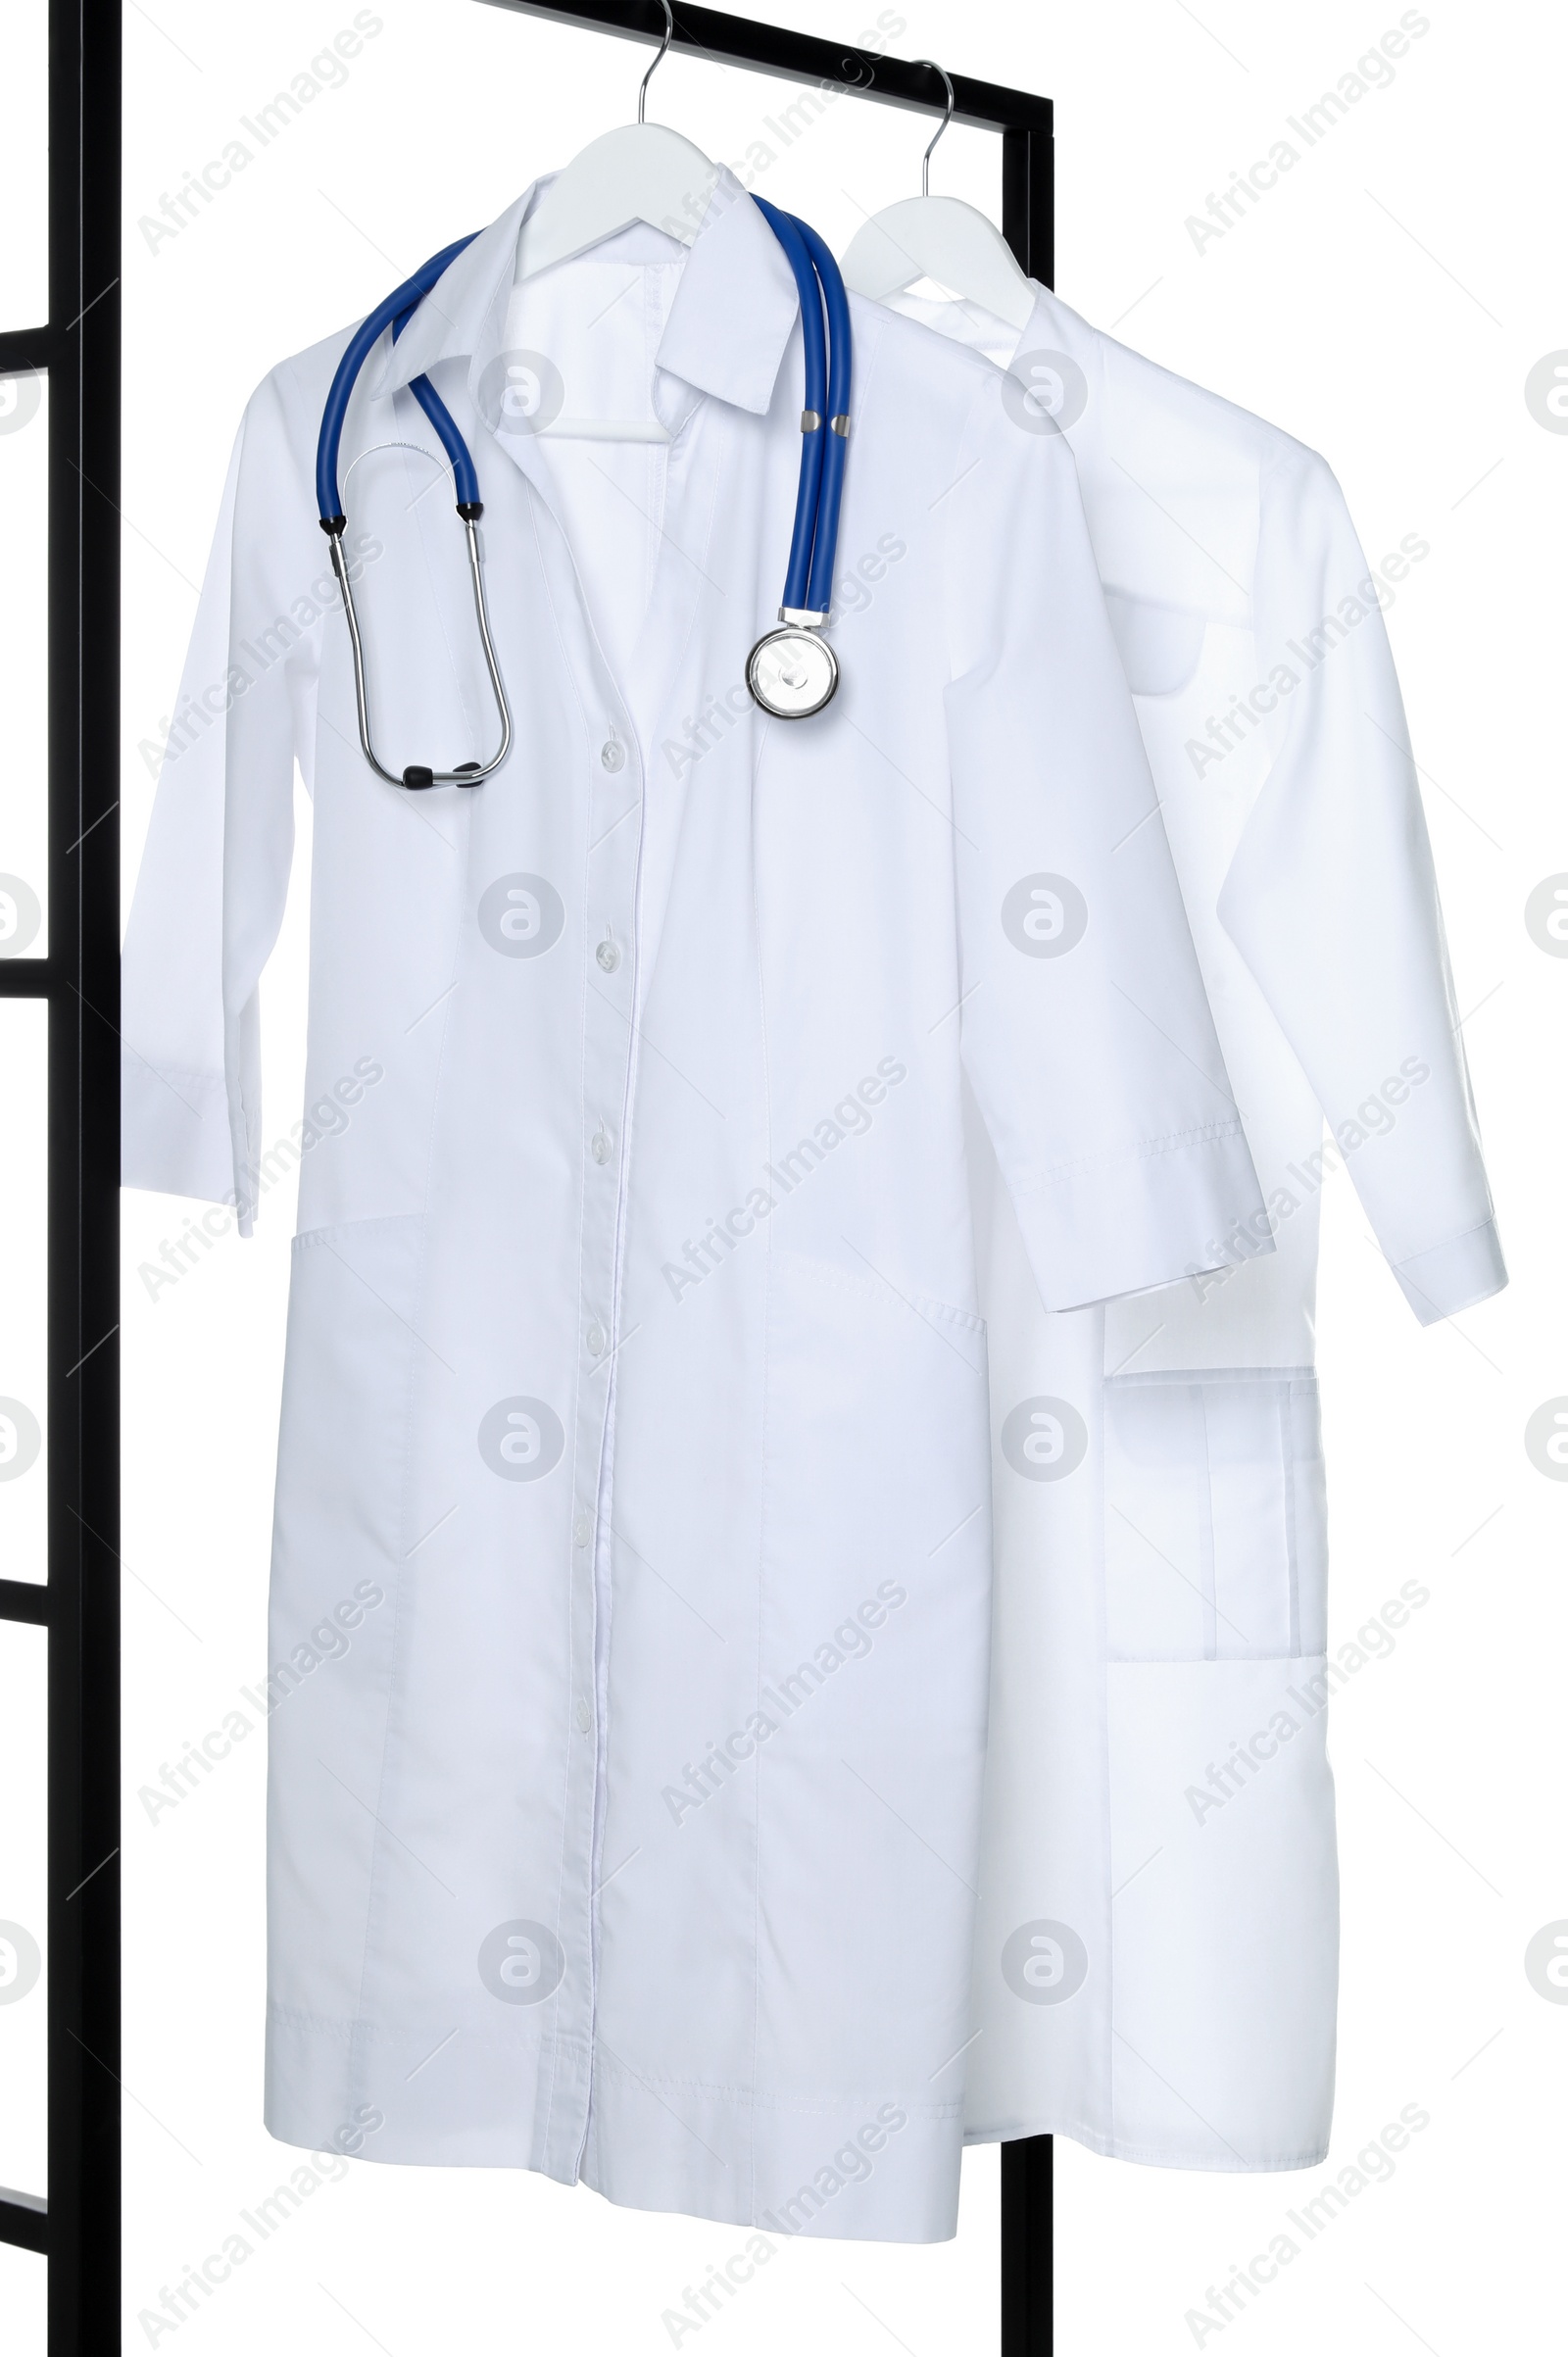 Photo of Doctor's gowns and stethoscope on rack against white background. Medical uniform